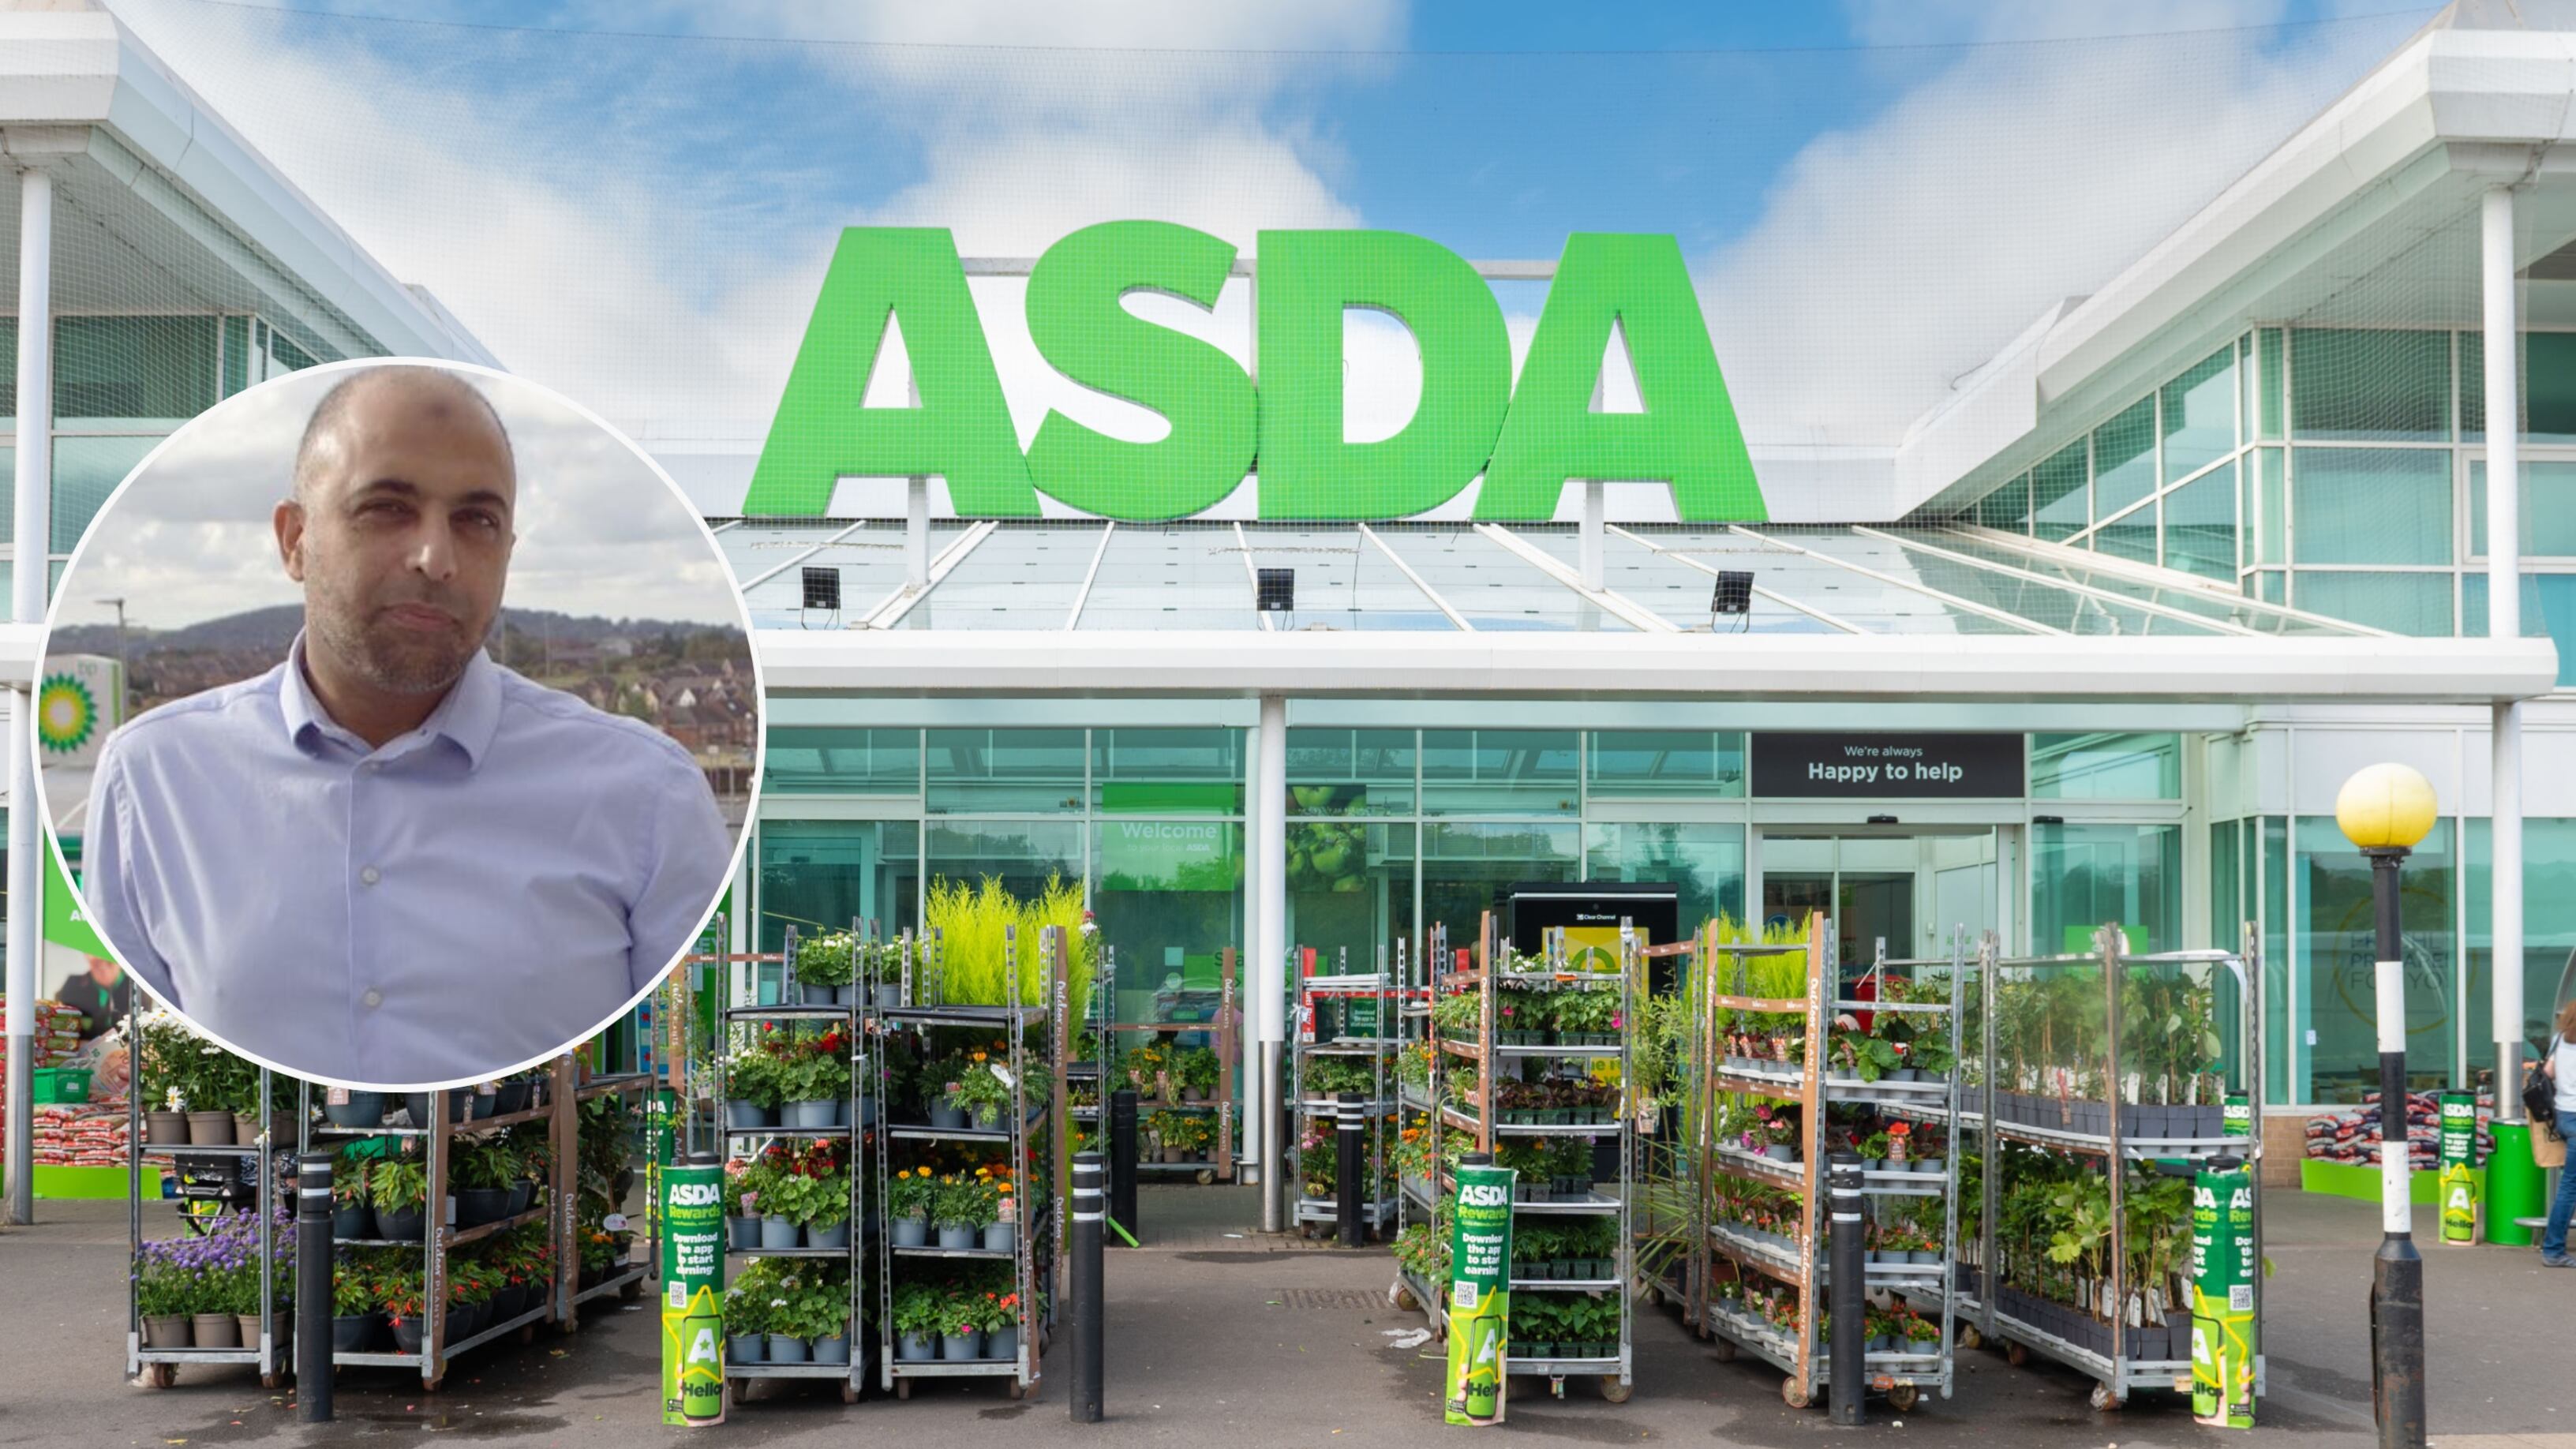 Zuber Issa (inset) is selling his 22.5% stake in Asda to funds managed by TDR Capital LLP. The deal will leave the UK-based private equity firm a 67.5% share of the retail business.